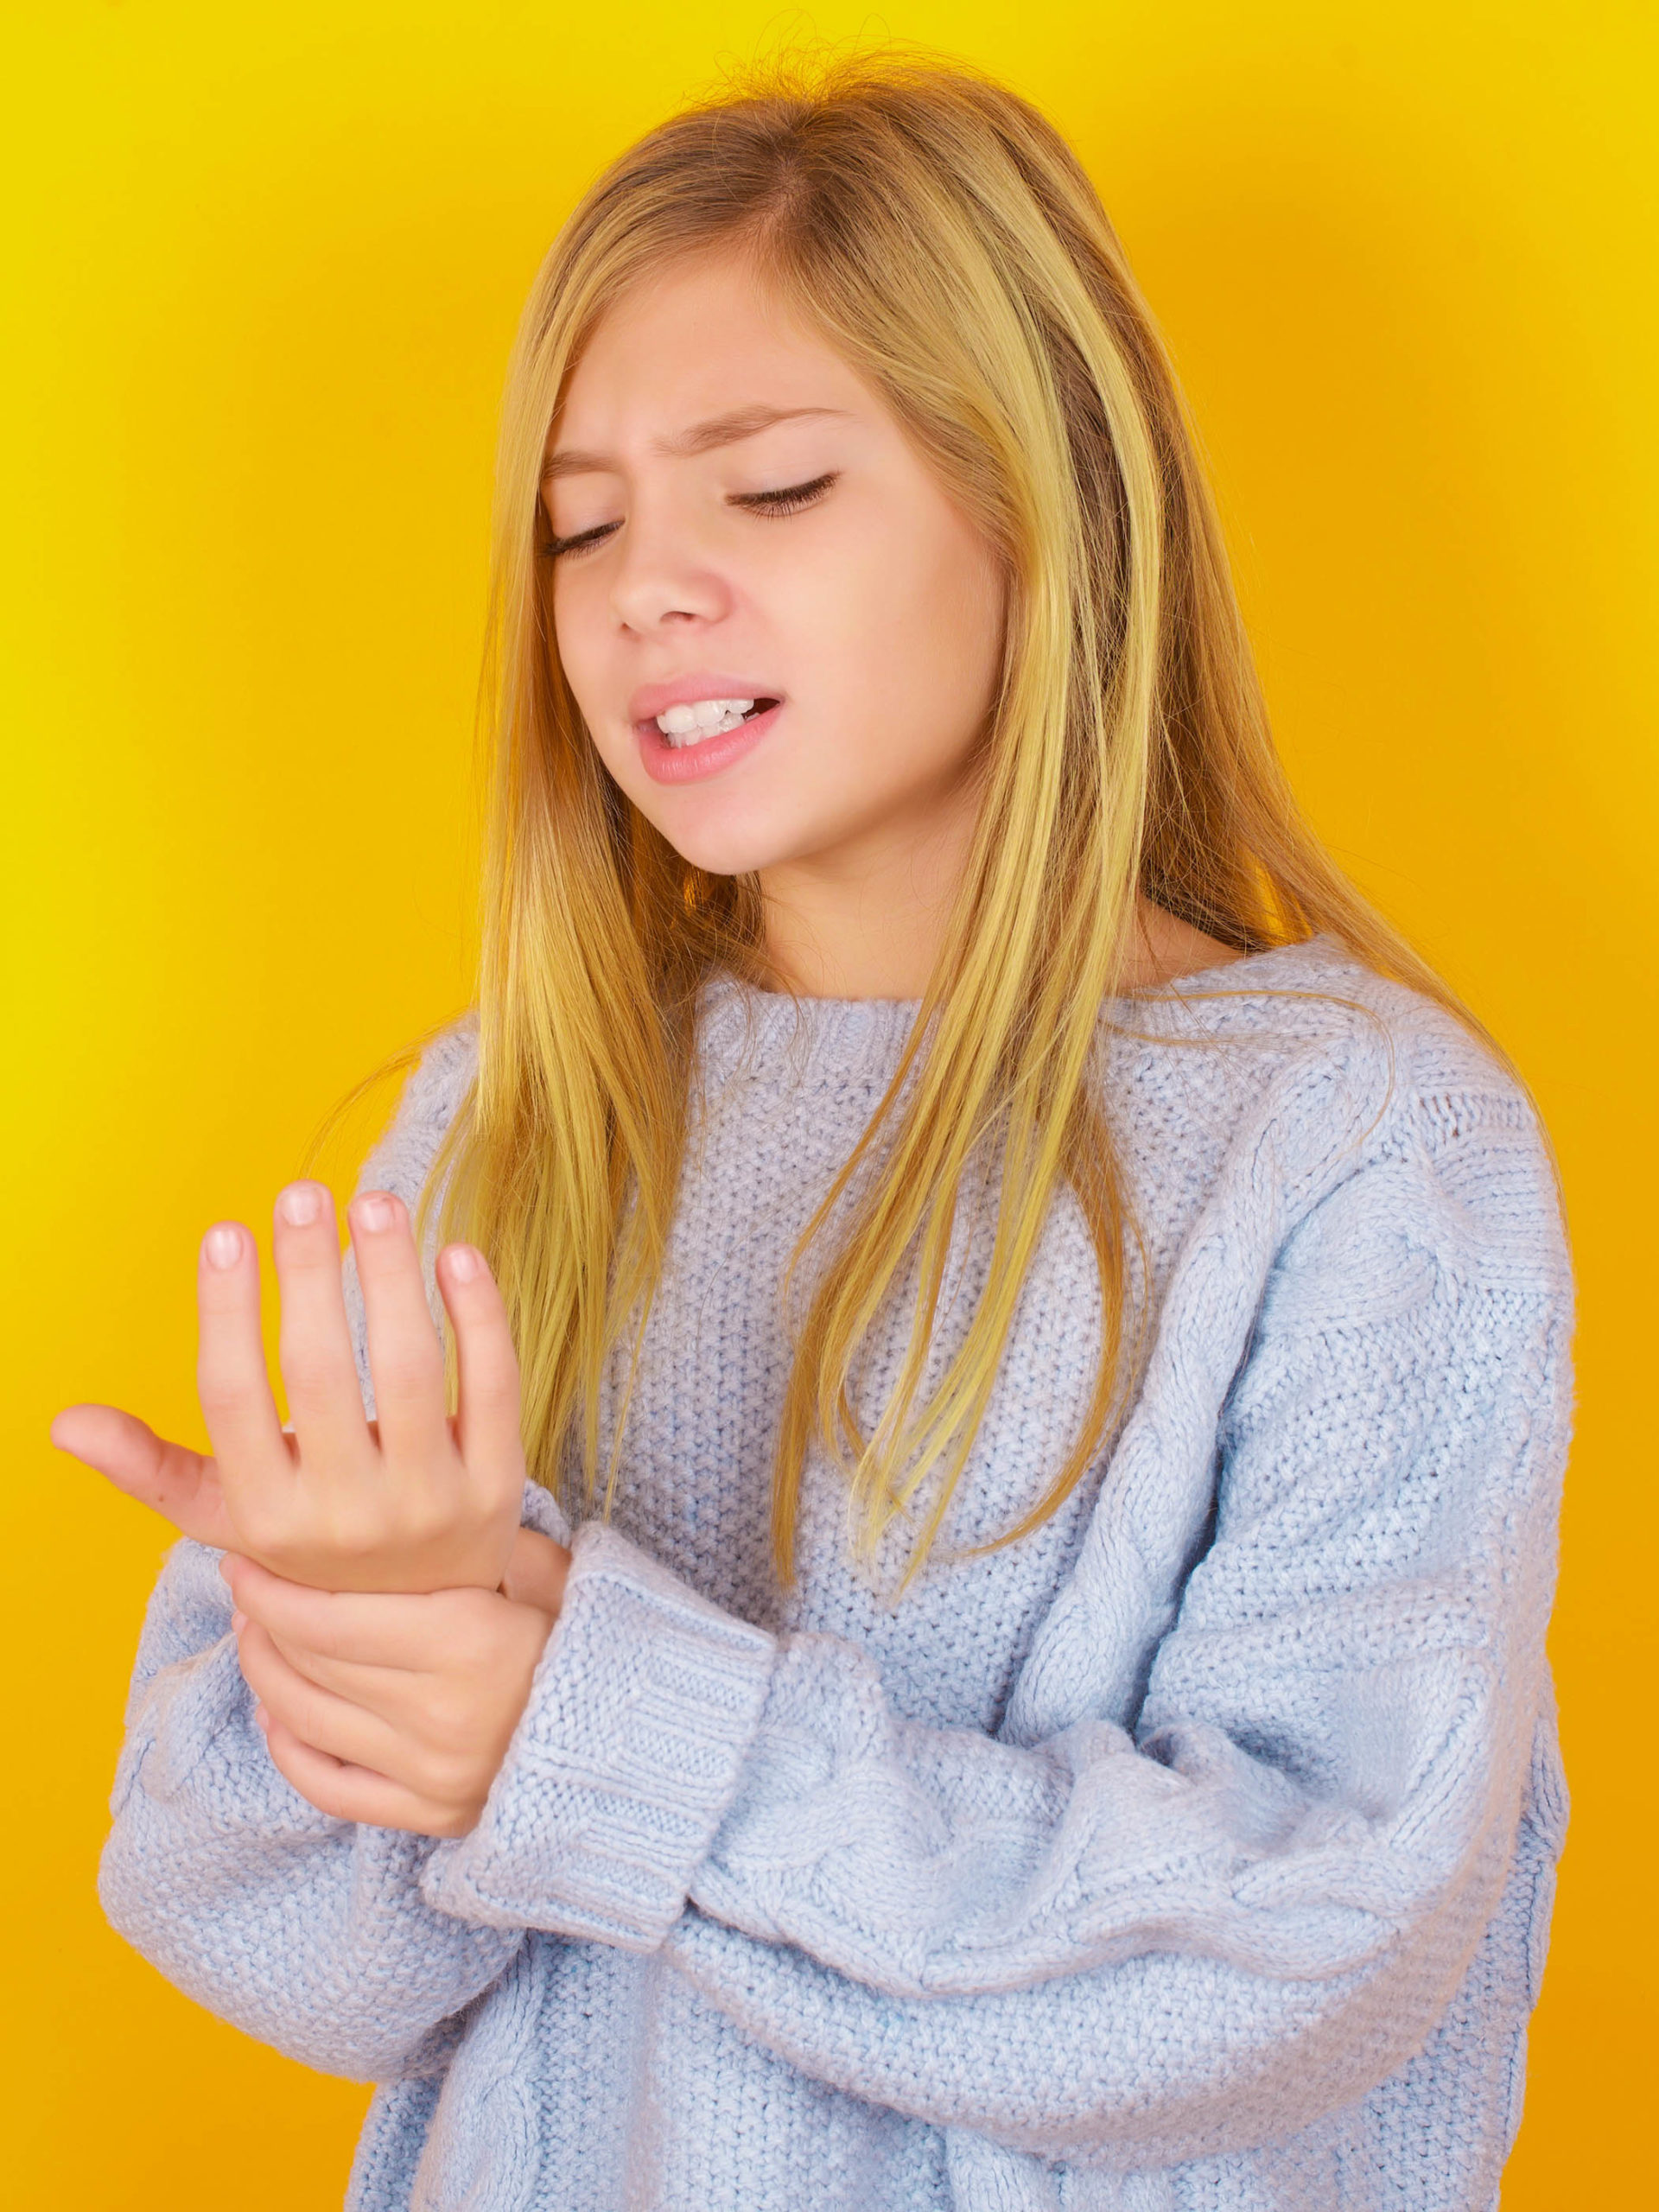 girl suffering from pain on hands and fingers